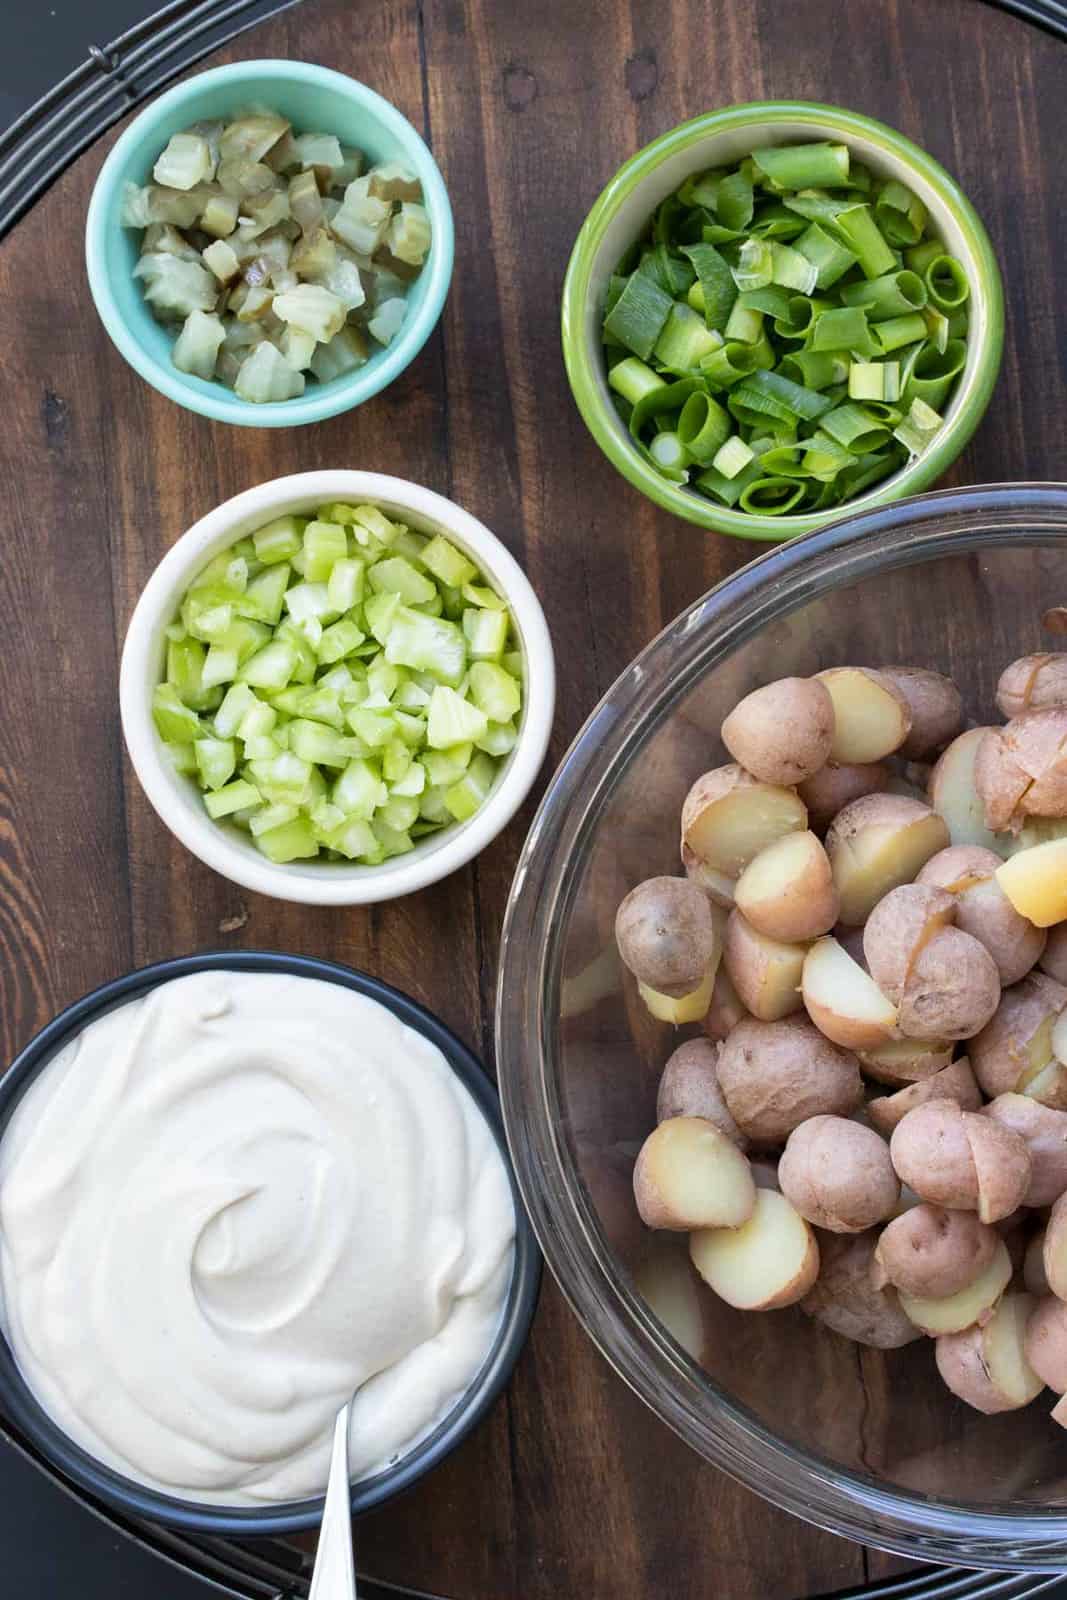 Bowls filled with ingredients for potato salad on a wooden surface